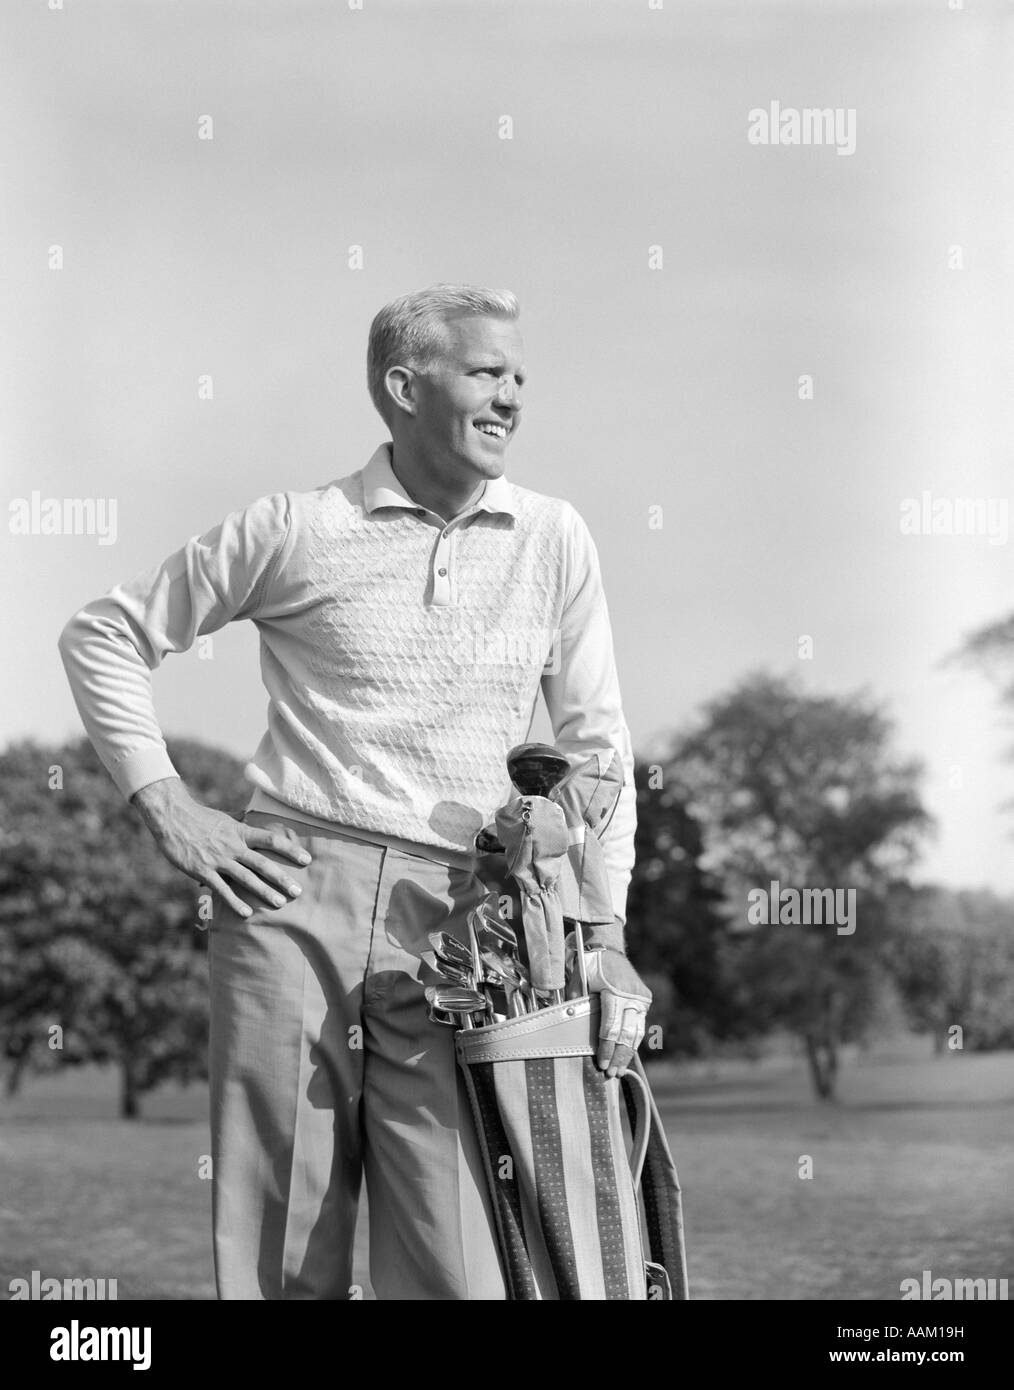 1960s SMILING BLOND MAN STANDING WITH GOLF BAG LOOKING DOWN FAIRWAY Stock Photo